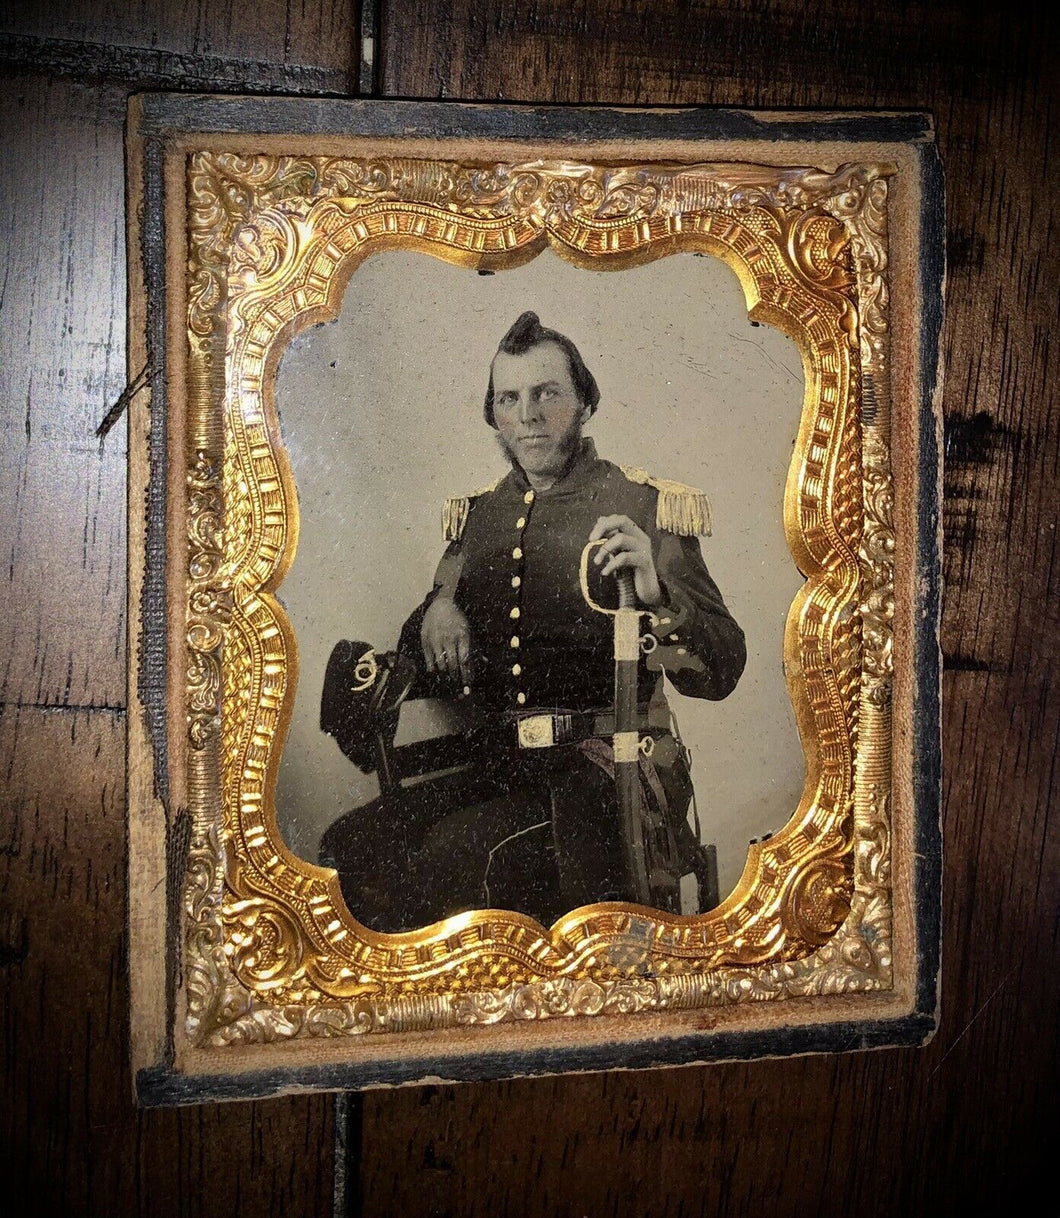 1/6 Ambrotype - Armed Civil War Soldier / Officer Holding Painted Gold Sword